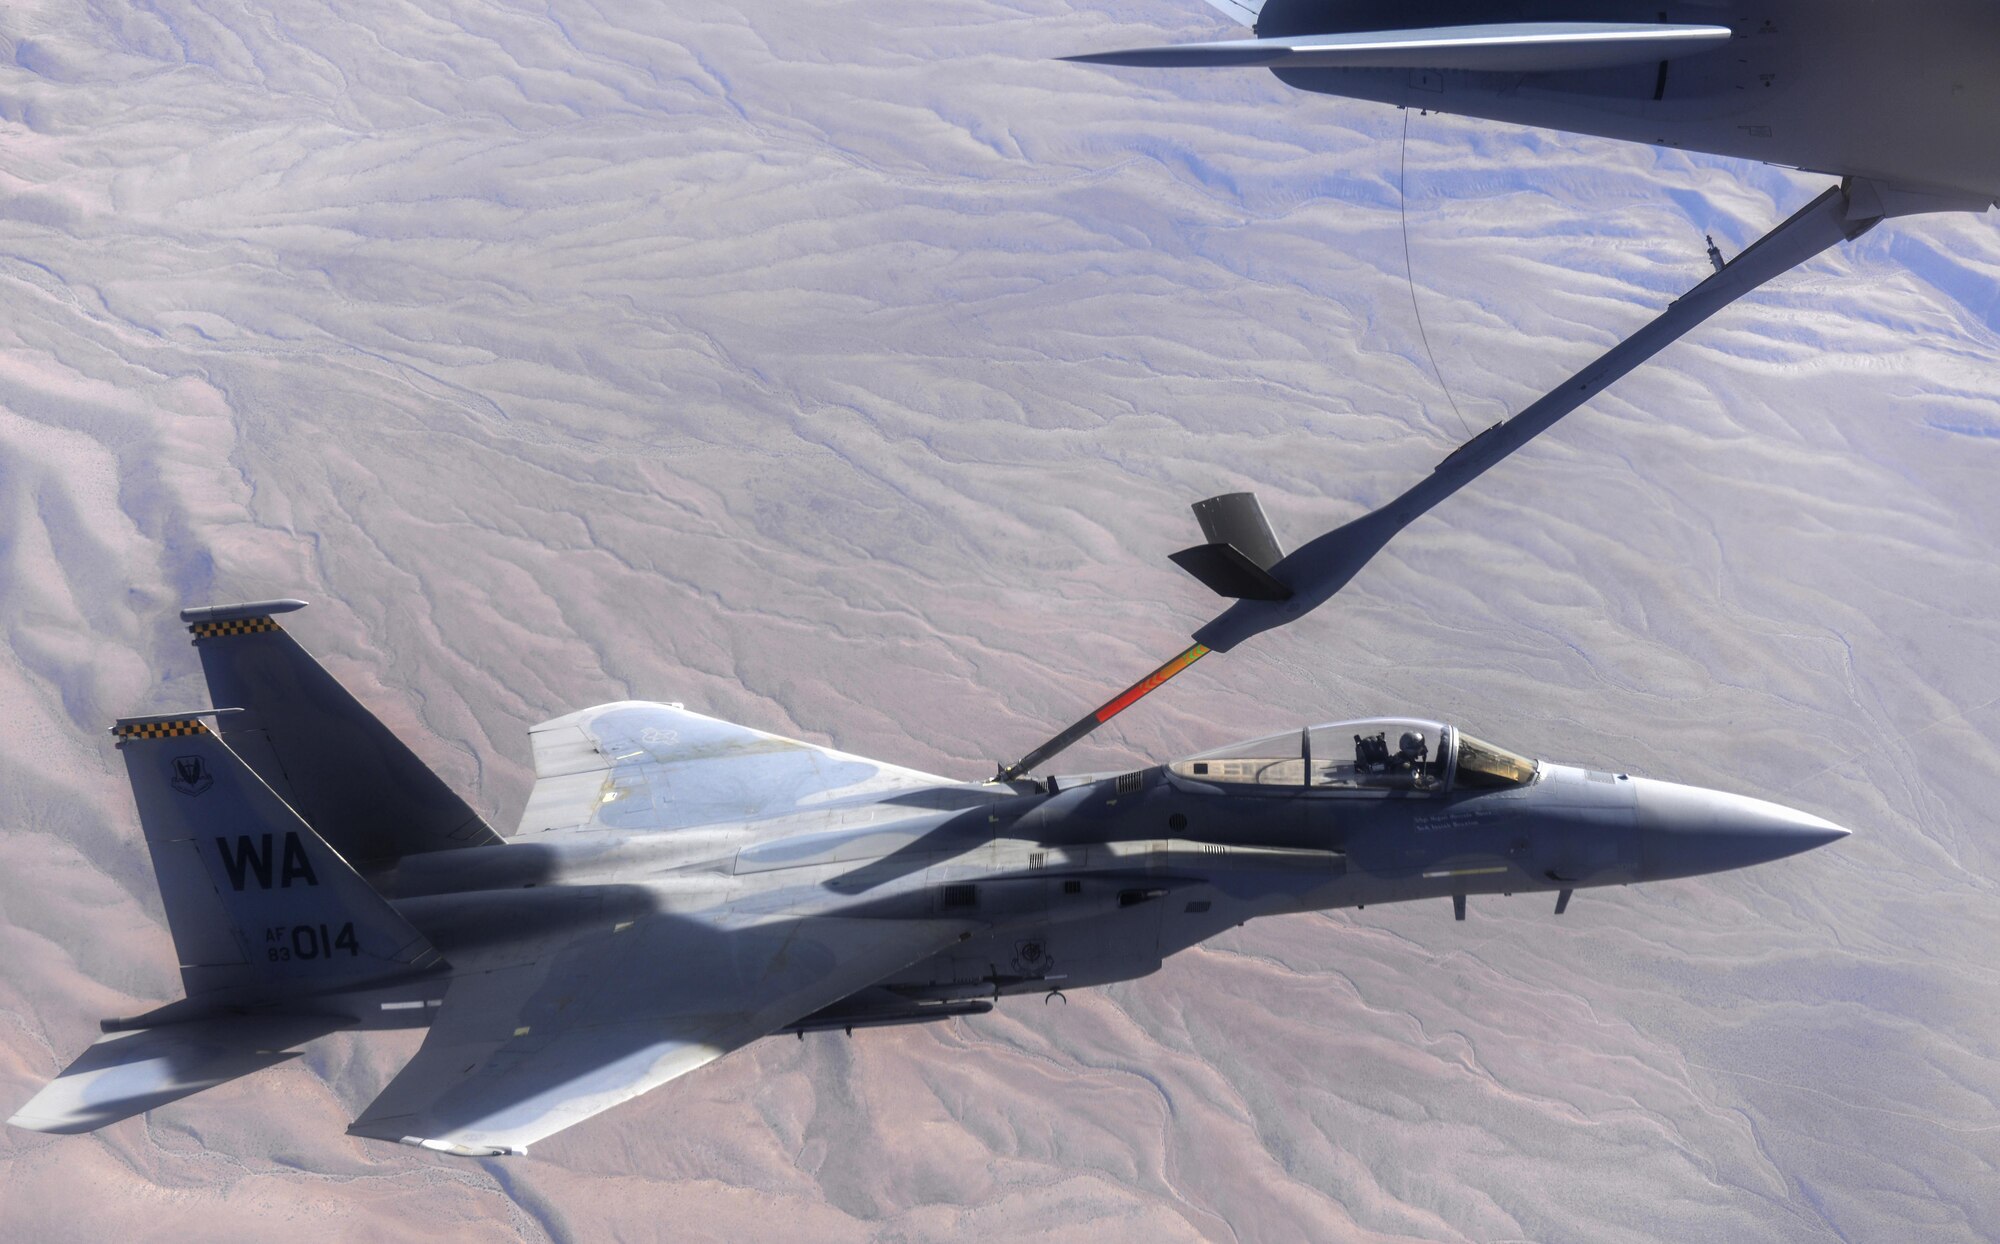 An F-15 fighter jet, assigned to the 433rd Weapons Squadron, at Nellis Air Force Base, Nevada, receives aerial refueling from a KC-135 Stratotanker cargo aircraft assigned to the 509th Weapons Squadron, at Fairchild Air Force Base, Washington, cargo aircraft assigned to the 509th Weapons Squadron, Fairchild Air Force Base, Washington, over the Nevada Test and Training Range July 10, 2017. The United States Air Force Weapons School teaches graduate-level instructor courses that provide the world's most advanced training in weapons and tactics employment to officers of the combat air forces and mobility air forces. (U.S. Air Force photo by Staff Sgt. Daryn Murphy/Released)